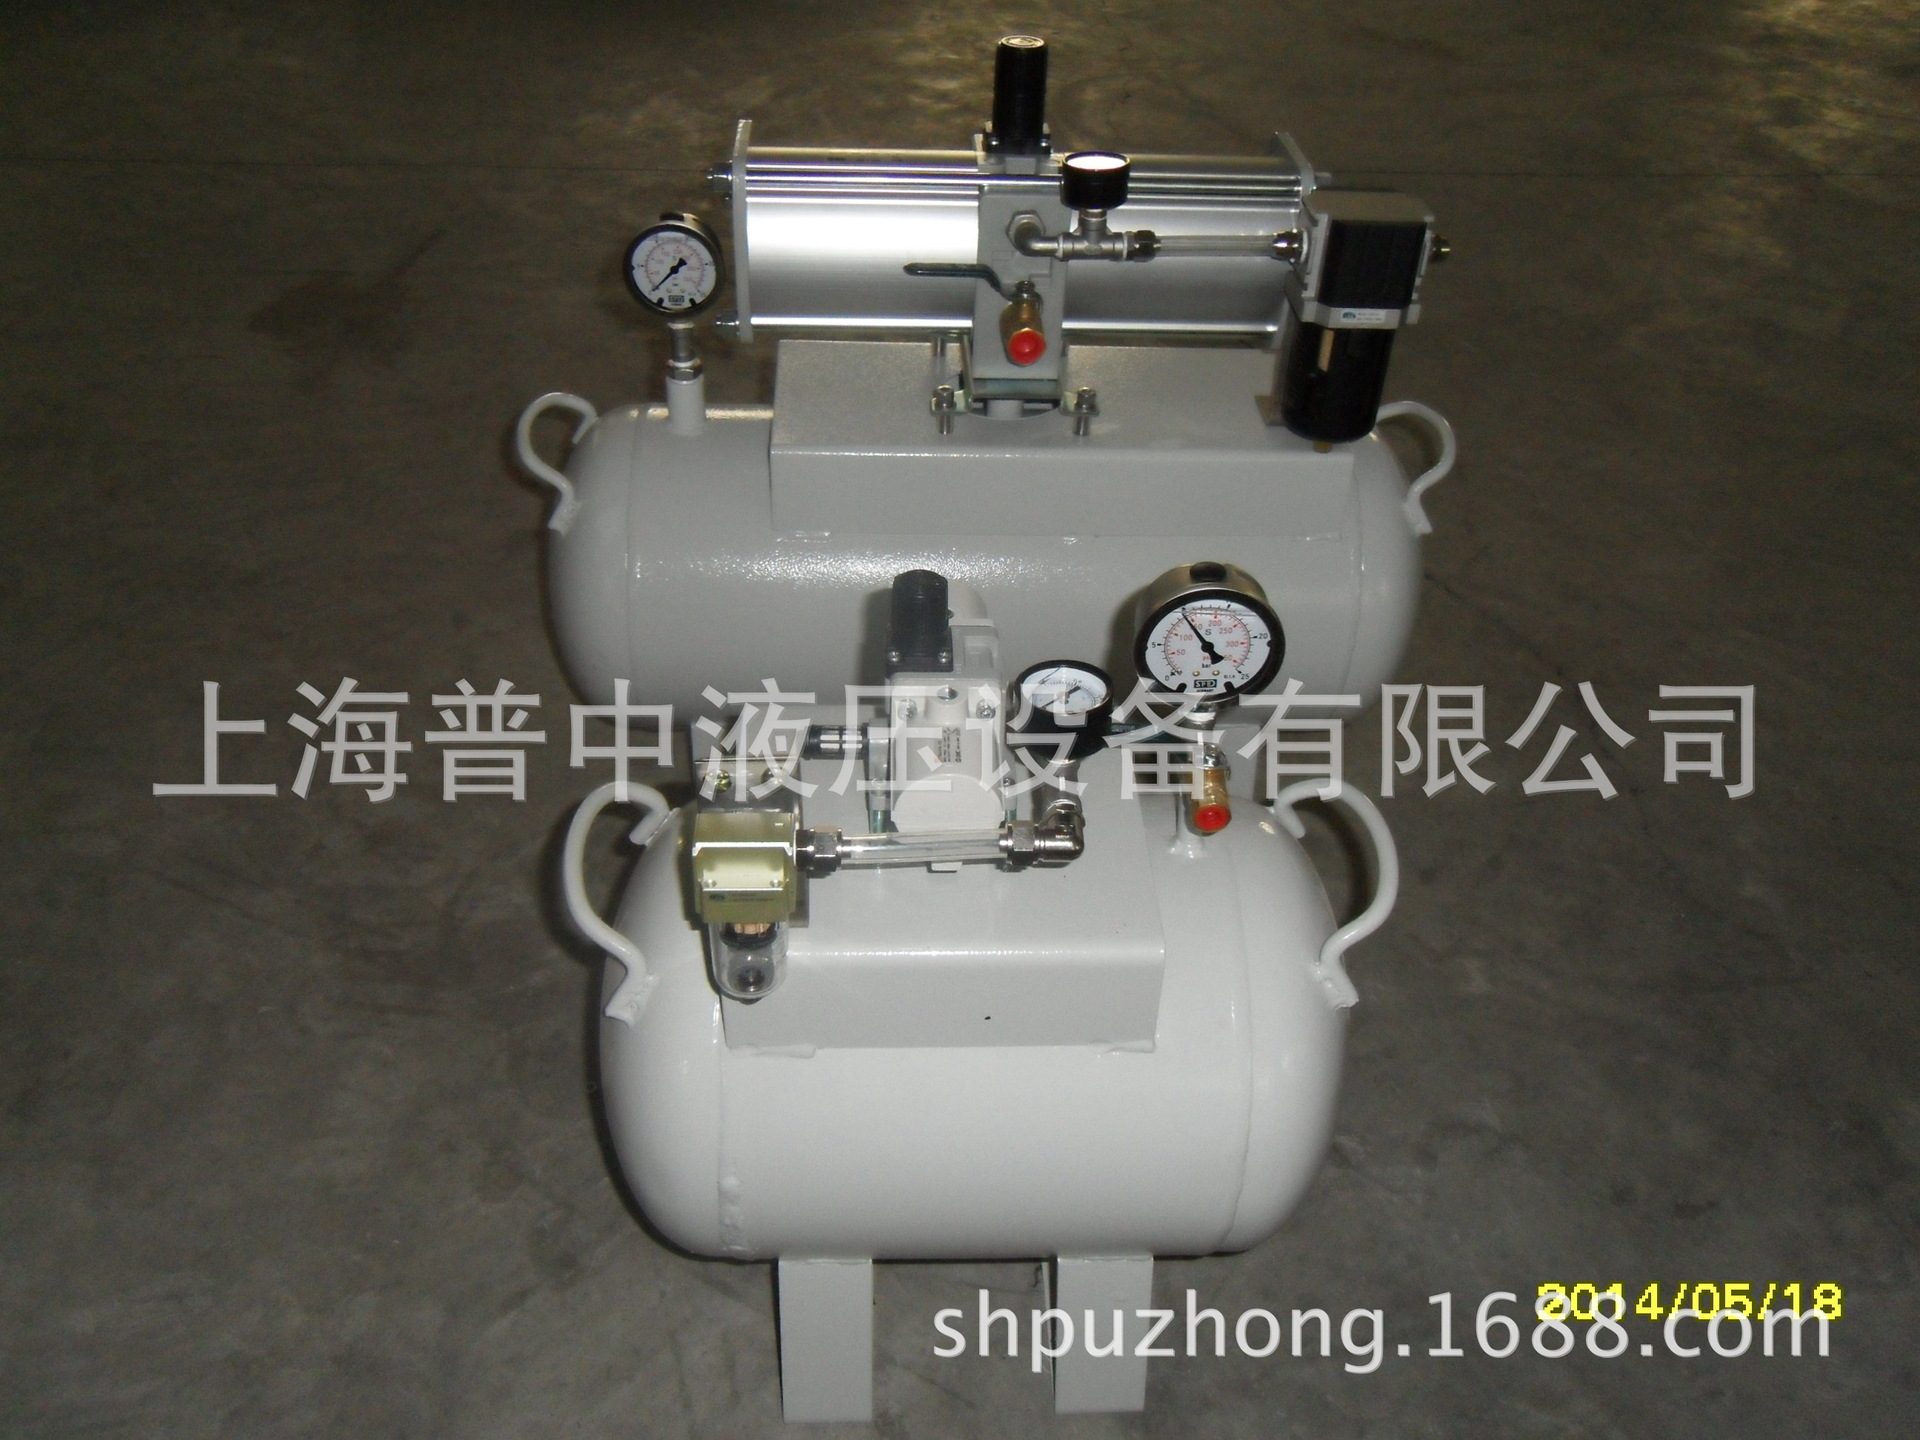 supply compress atmosphere Booster pump atmosphere multiplication equipment